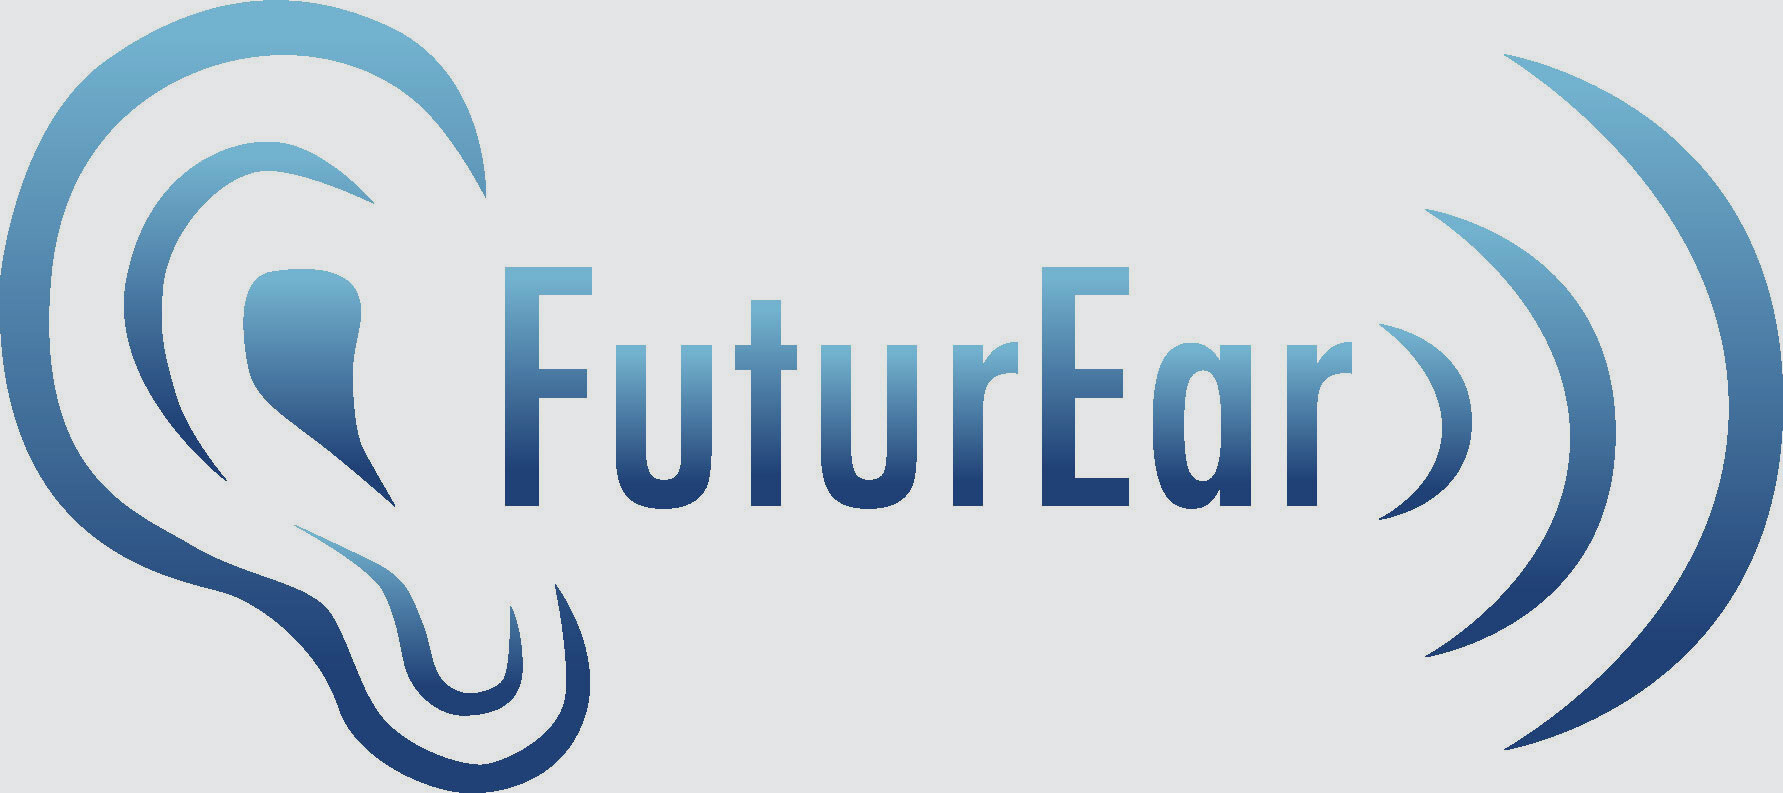 hearX® featured on Furture Ear Radio: hearX, healthy hearing for everyone, everywhere